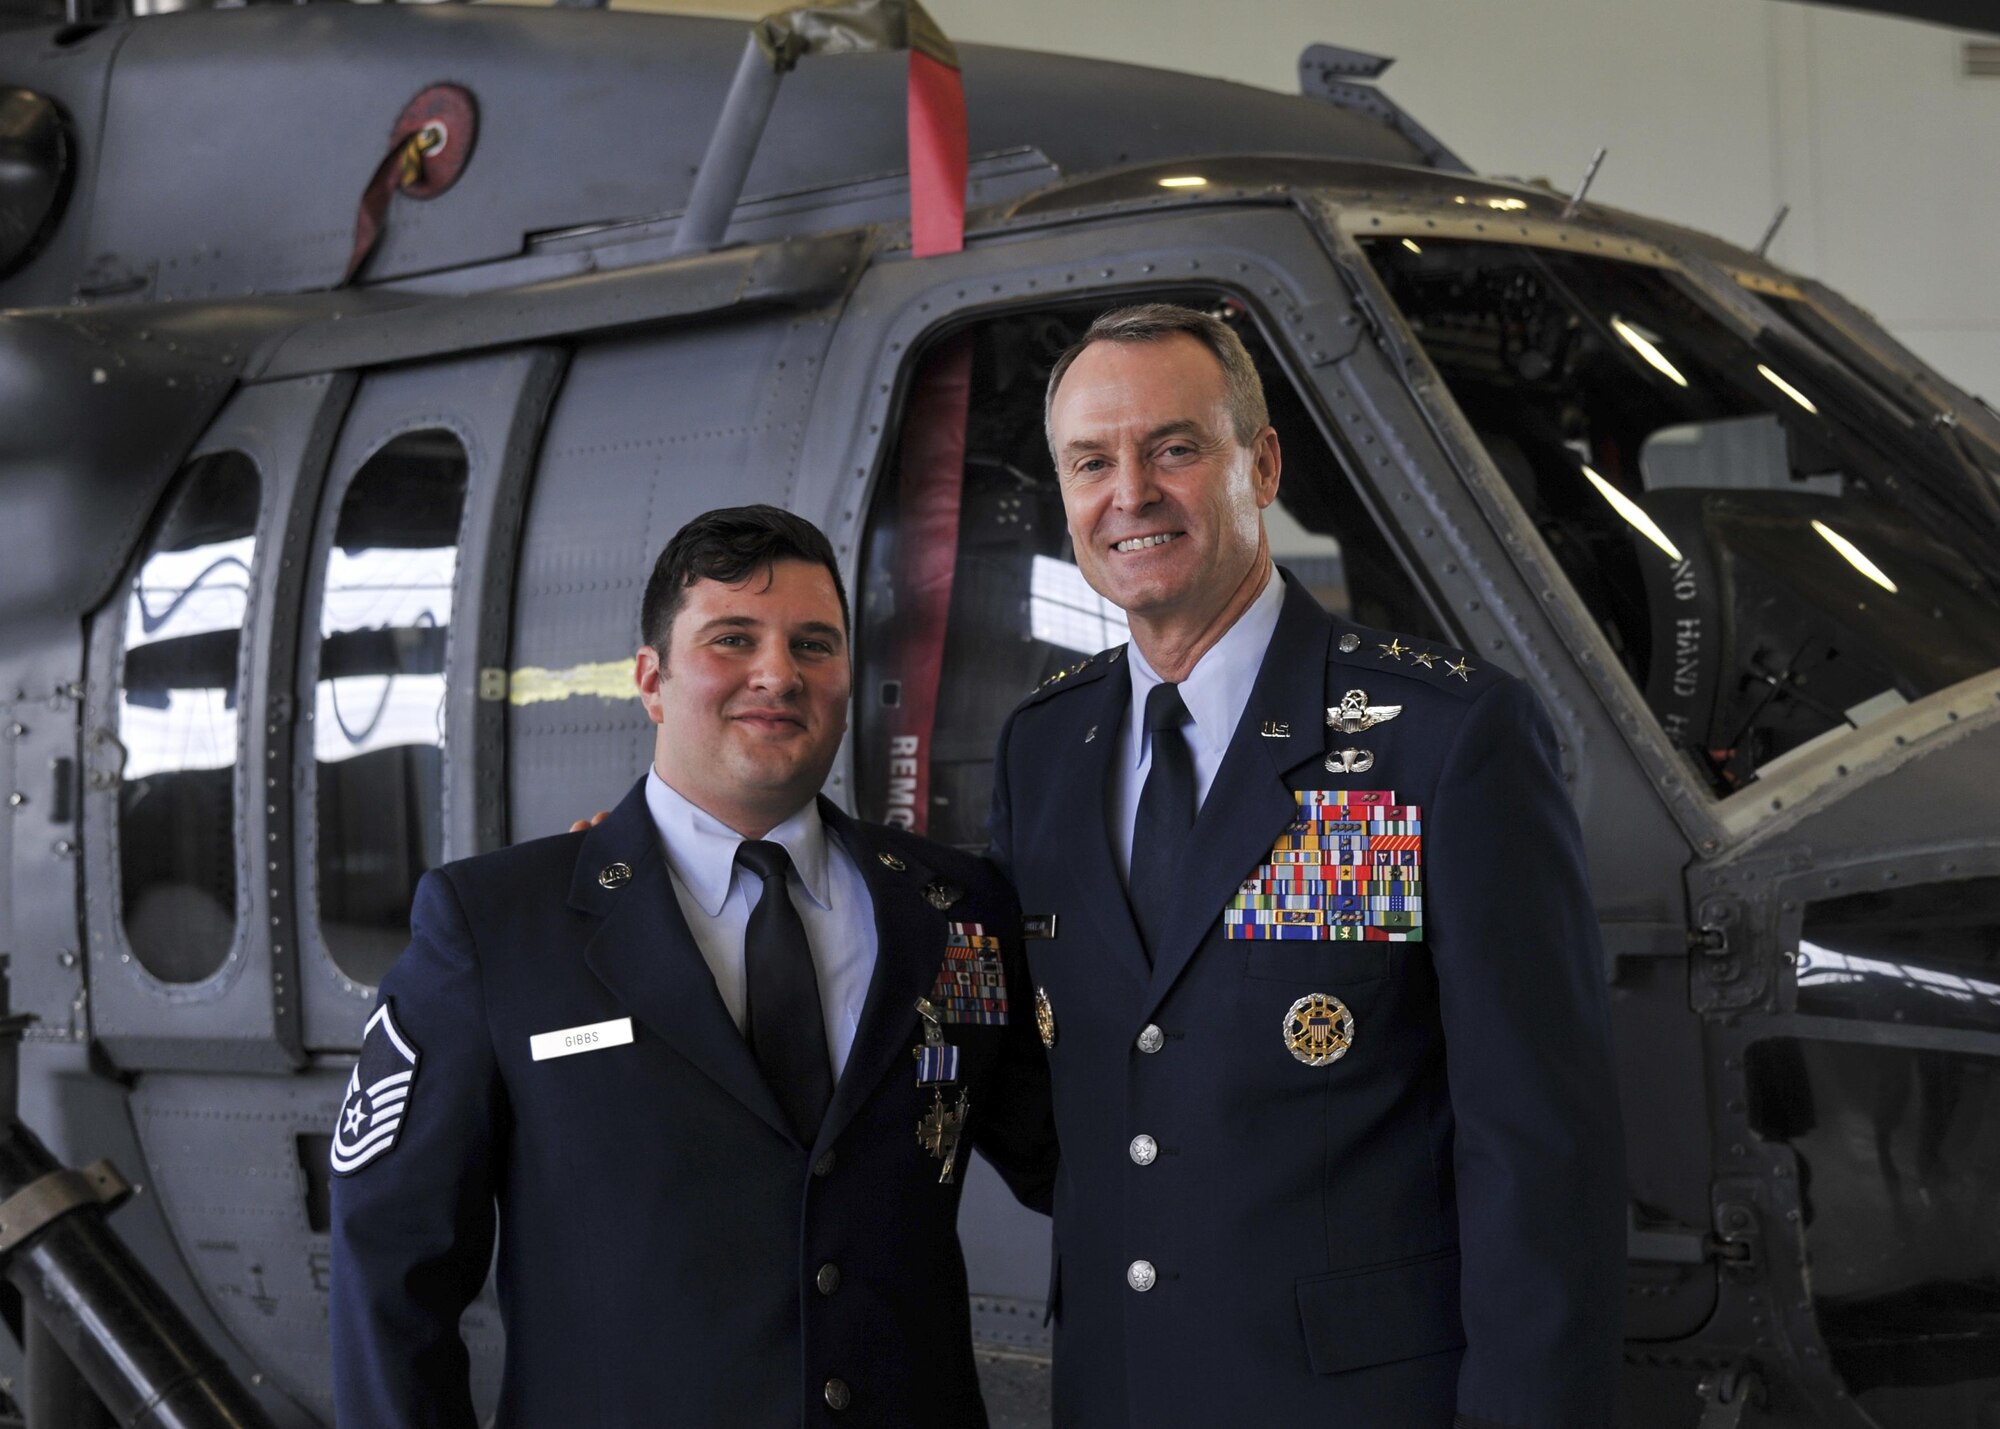 Master Sgt. Gregory Gibbs, 512th Rescue Squadron operations superintendent, right, and Lt. Gen. Darryl Roberson, Air Education and Training Command commander, from Joint Base San Antonio, Texas, stand in front of an HH-60 Pave Hawk following the Distinguished Flying Cross medal ceremony at Kirtland Air Force Base, New Mexico, Jan. 13. Ranked as the highest military aviation award, Gibbs received the medal for distinguishing himself as a HH-60 Pave Hawk aerial gunner in a high-risk rescue mission in Afghanistan on May 26, 2011.  